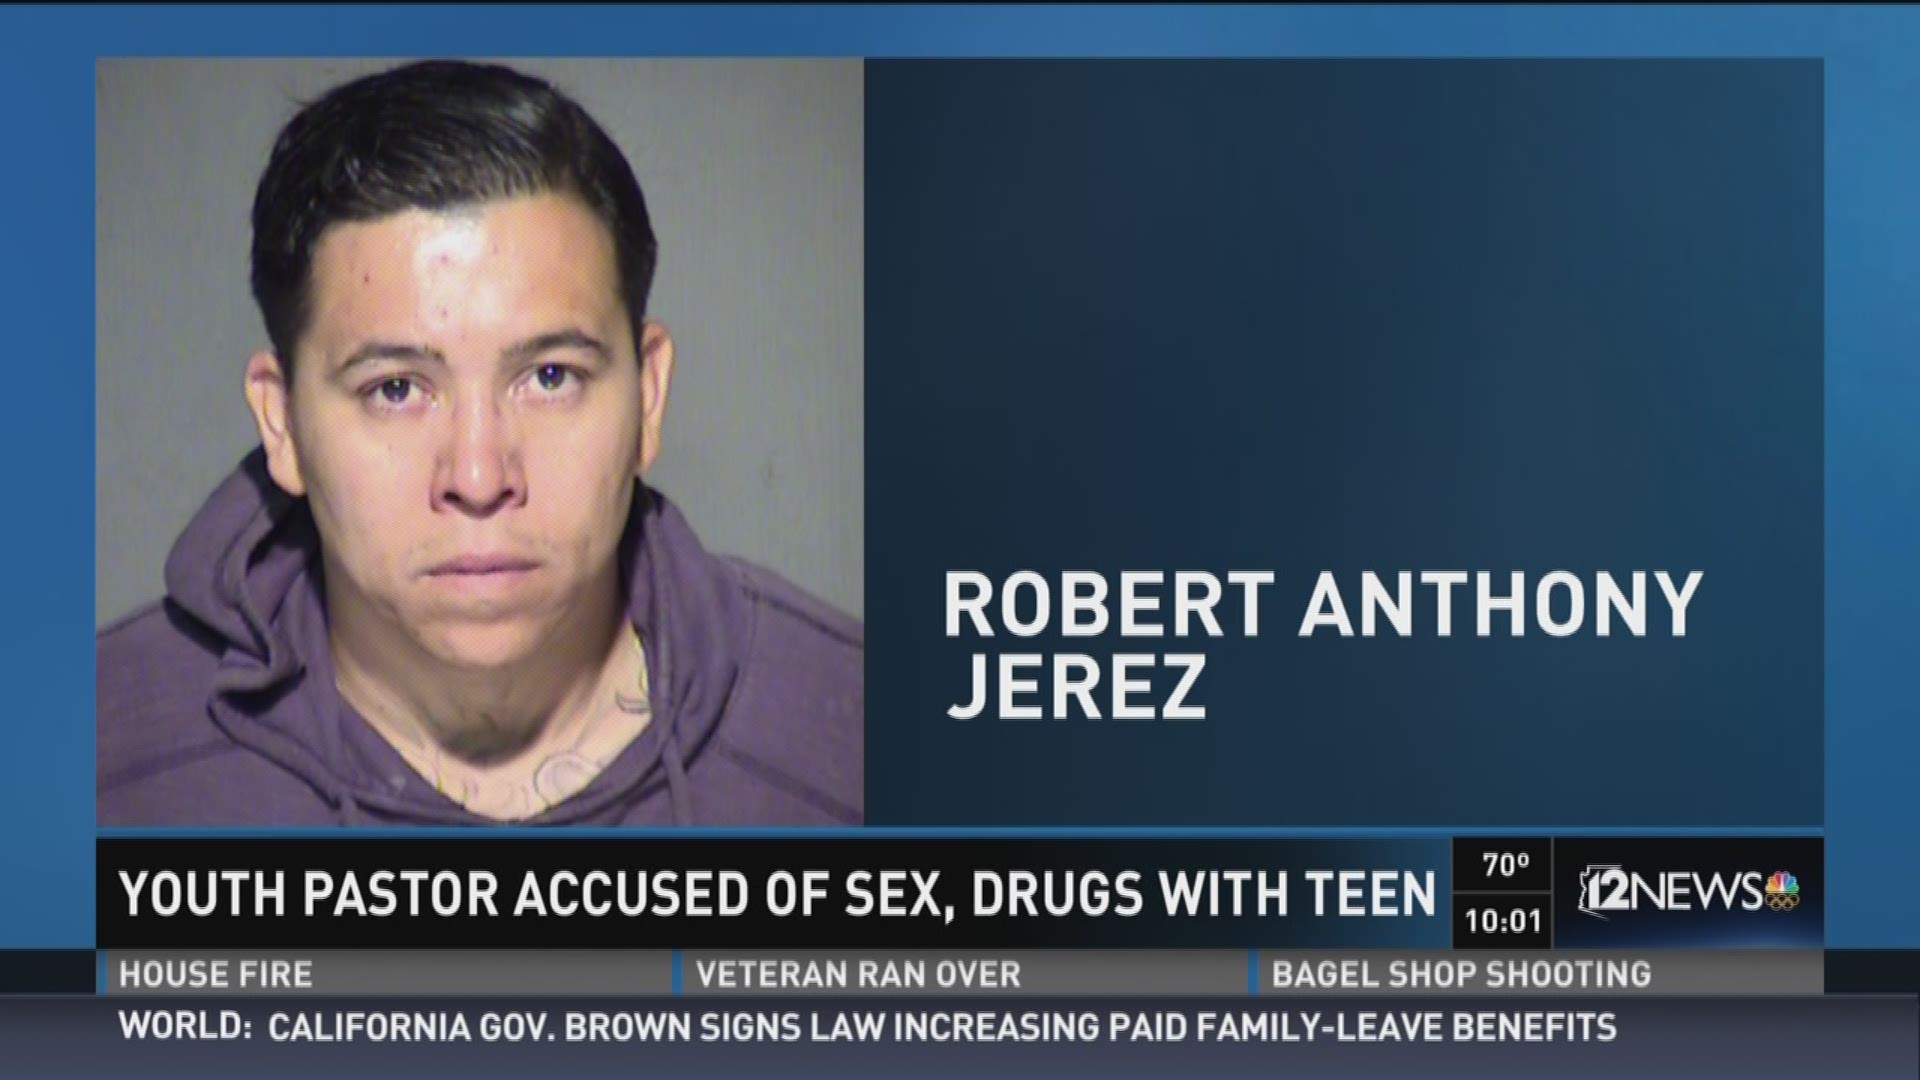 youth pastor accused of sex, drugs with teen.